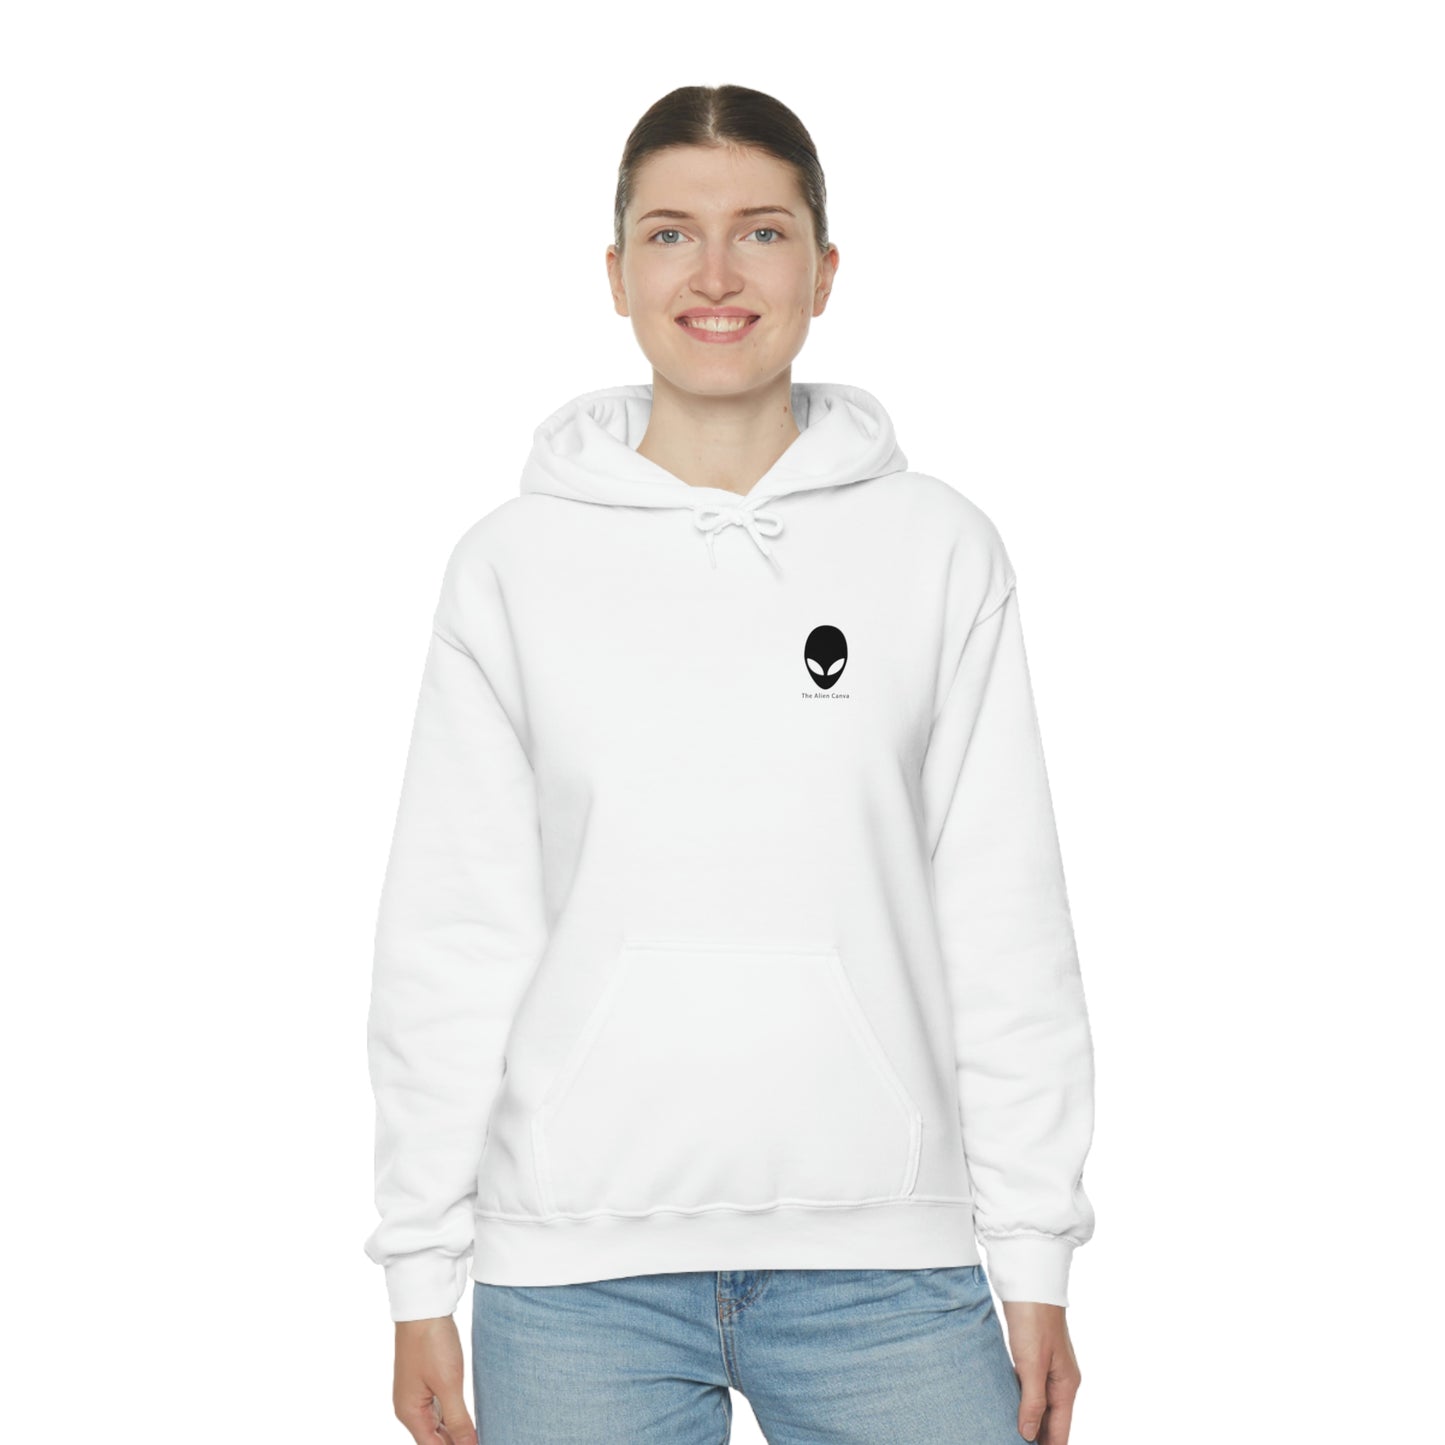 "The Sentinel in the Snowy Glade" - The Alien Unisex Hoodie